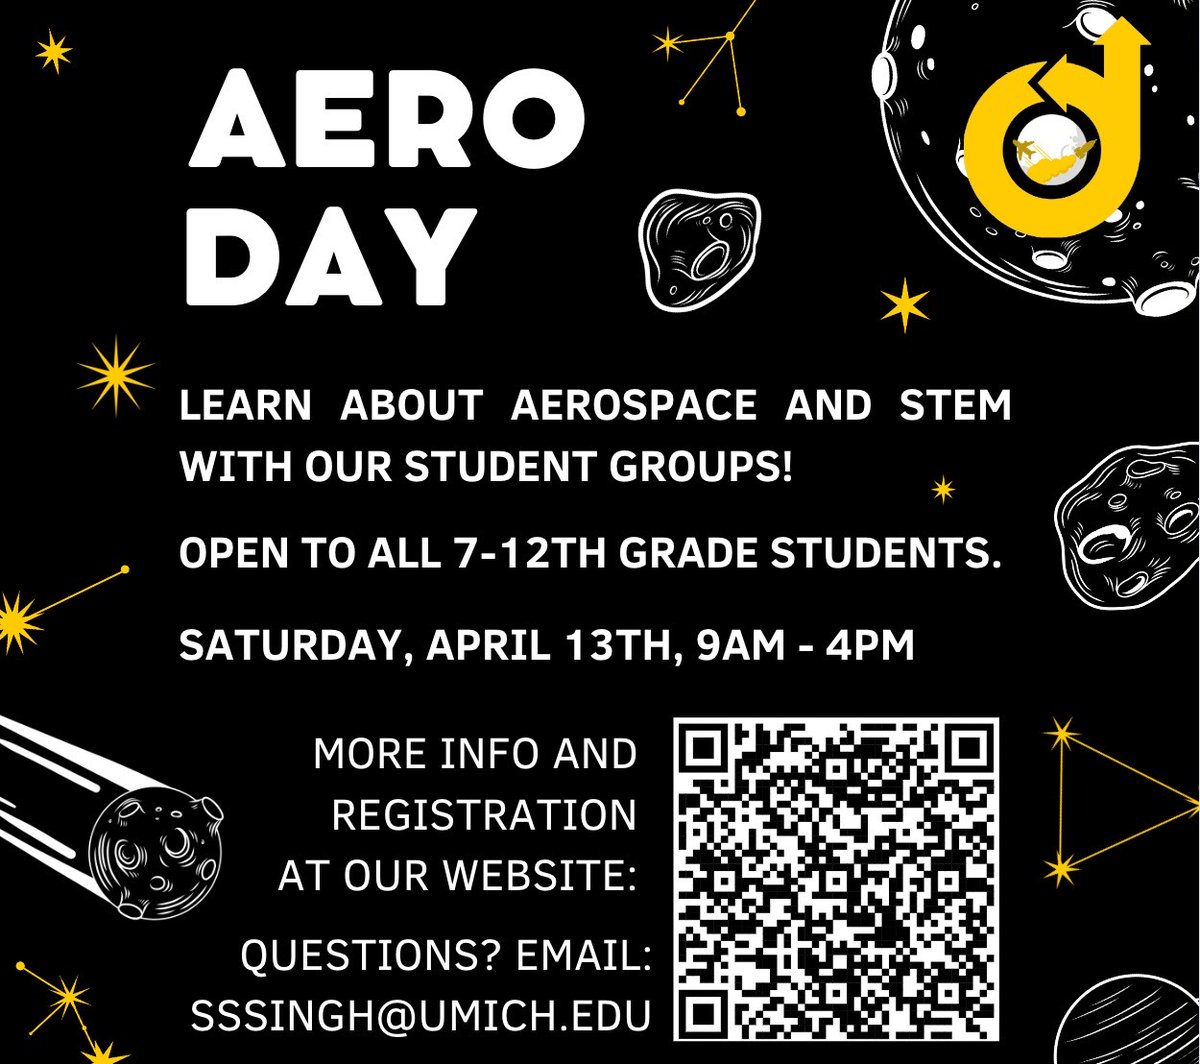 AIAA of U-M is hosting Aerospace Day for all 7-12 graders this Saturday, April 13, in FXB. This event immerses students in engaging activities to expose and inspire them to learn about aerospace and STEM degrees. Learn more by visiting their website: public.websites.umich.edu/~aiaaoutreach/…